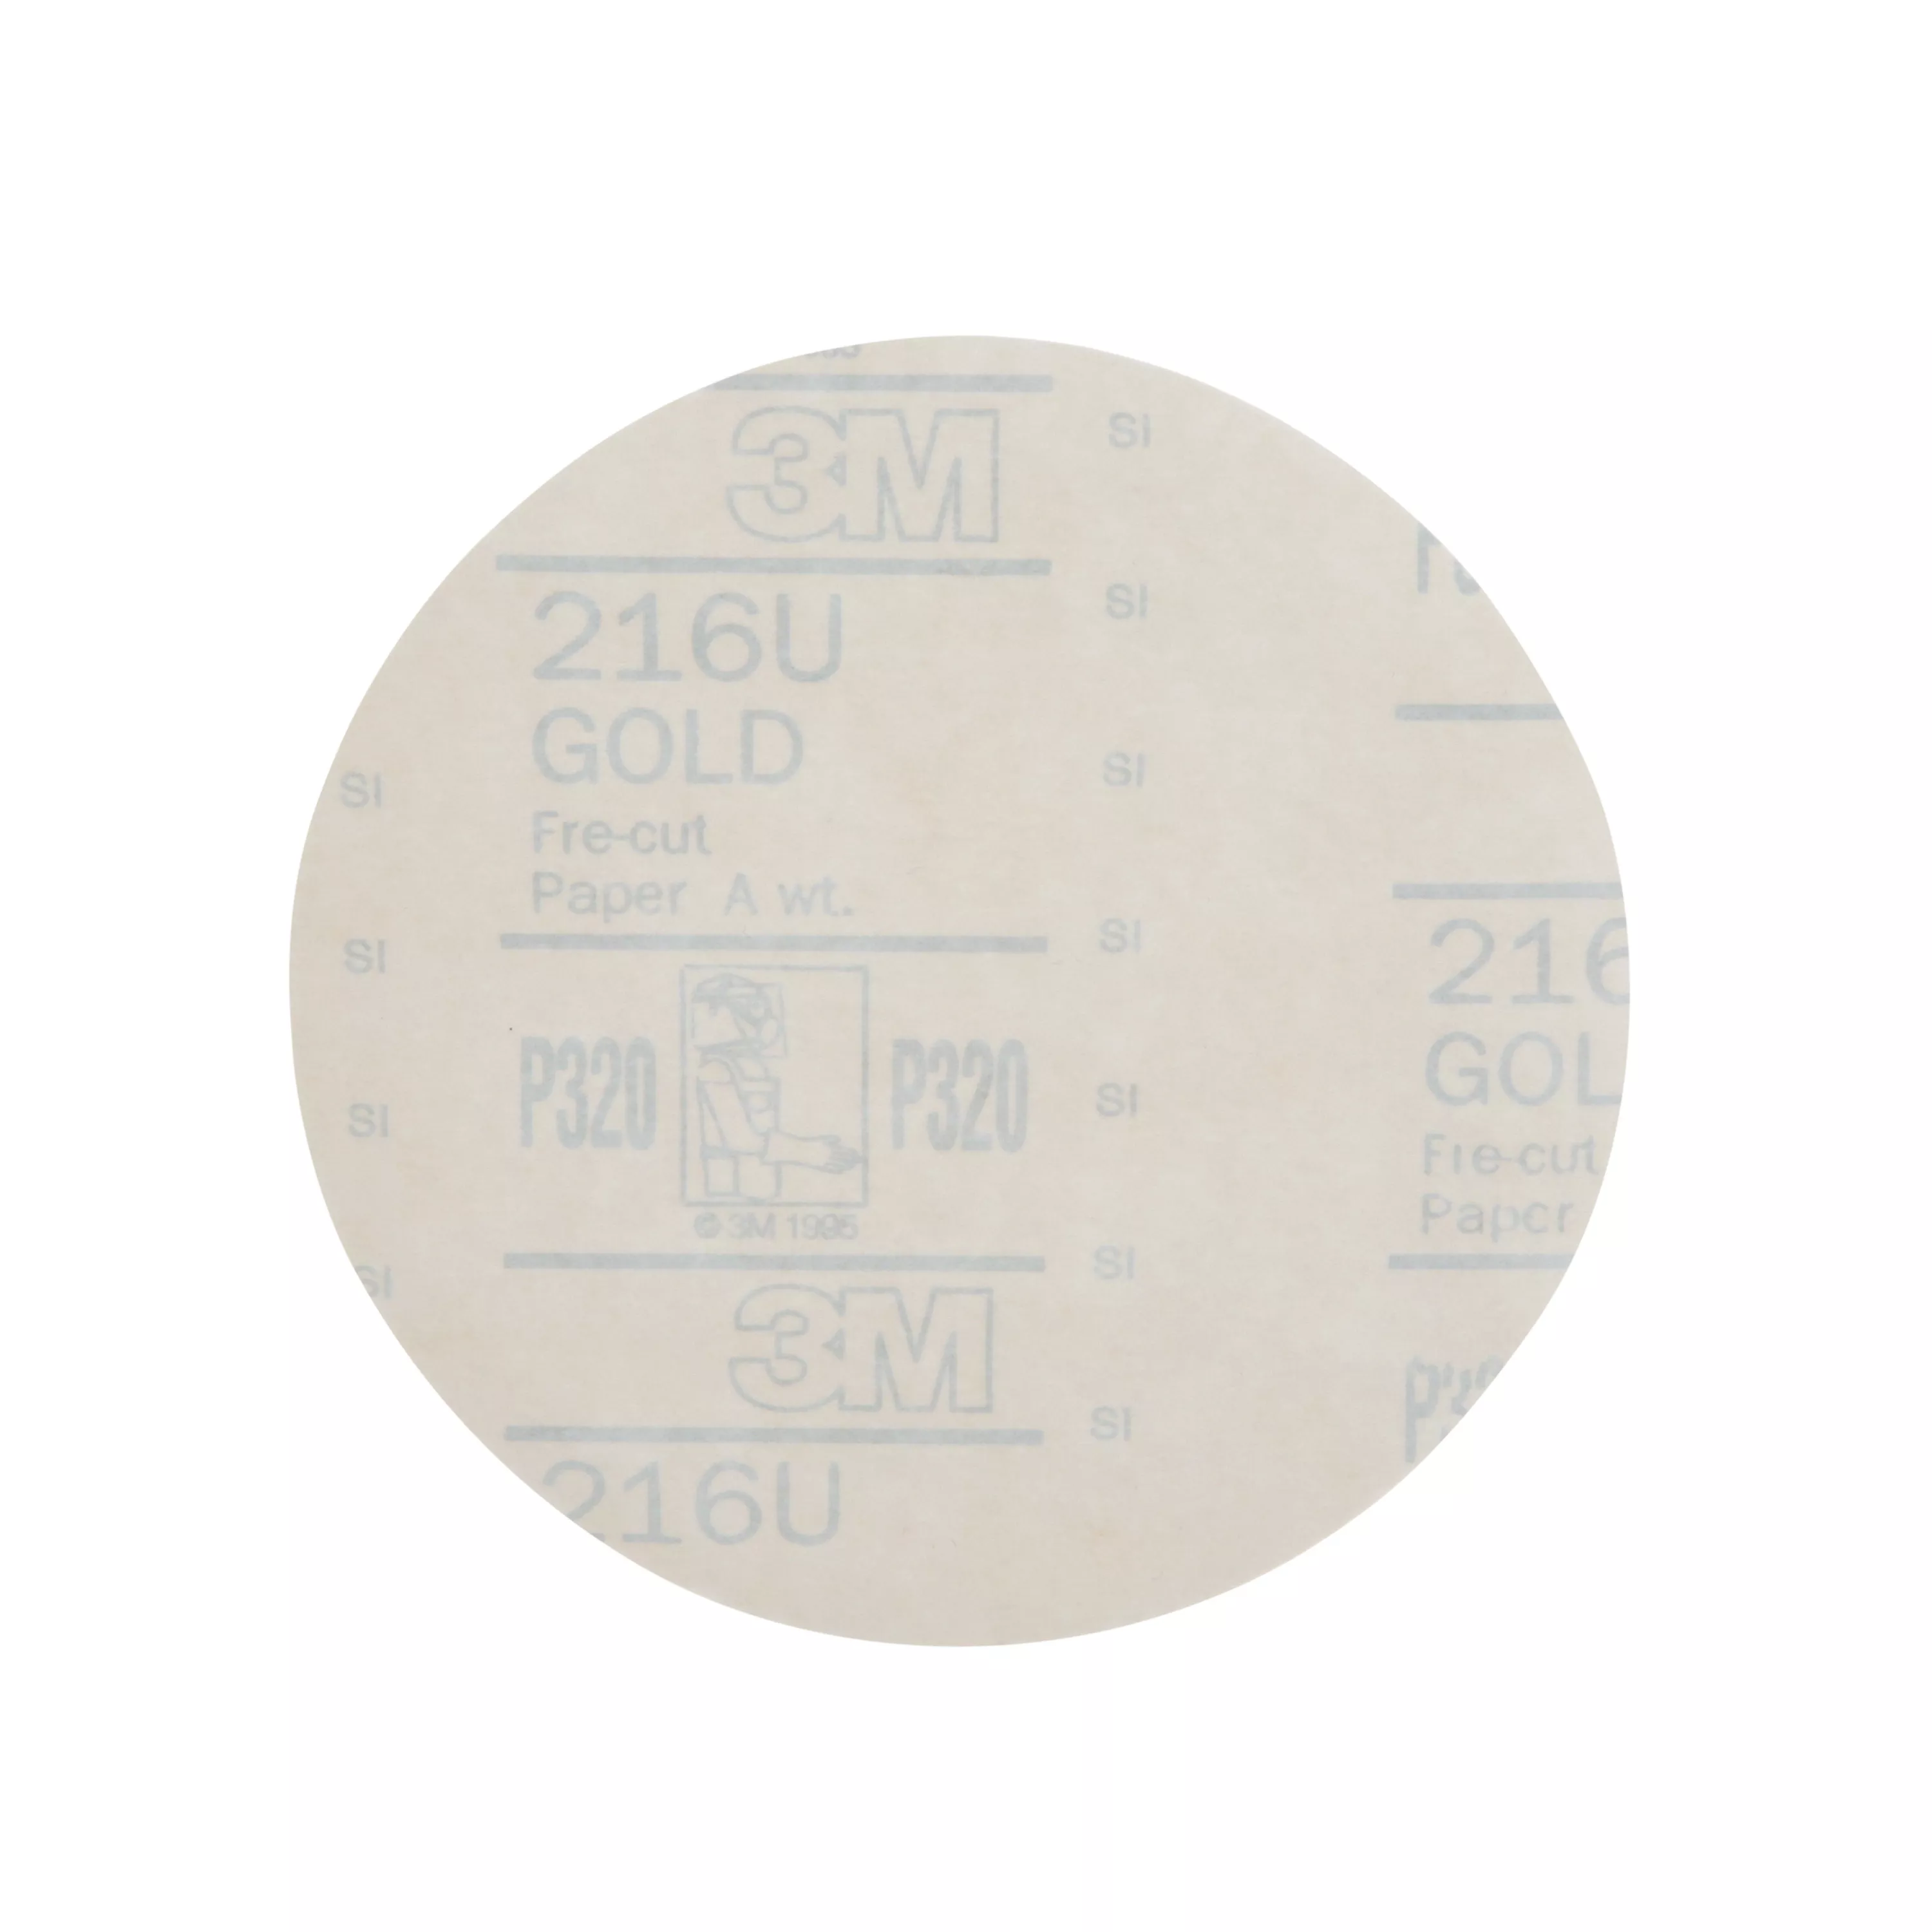 SKU 7010300624 | 3M™ Sanding Discs with Stikit™ Attachment 10 Pack